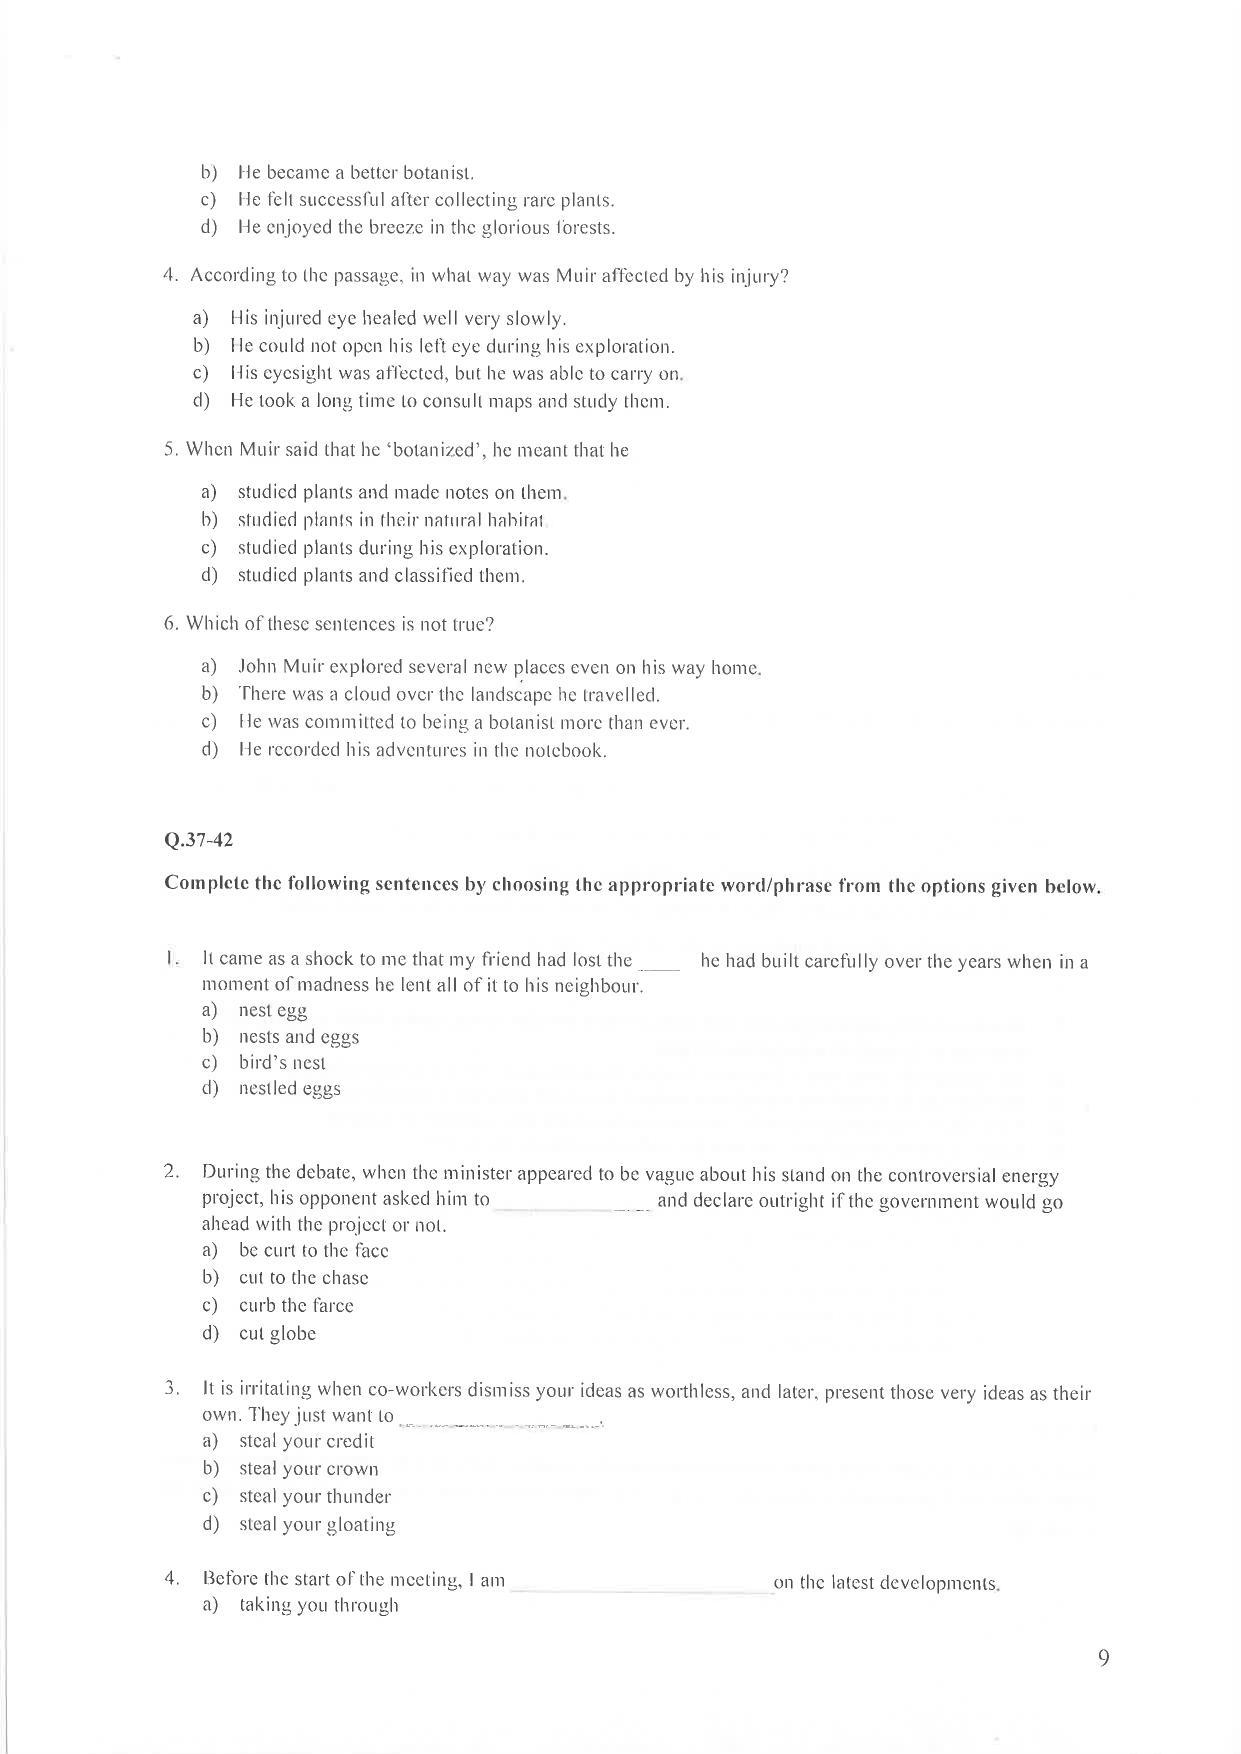 IIM Indore IPM 2020 Question Paper - Page 9